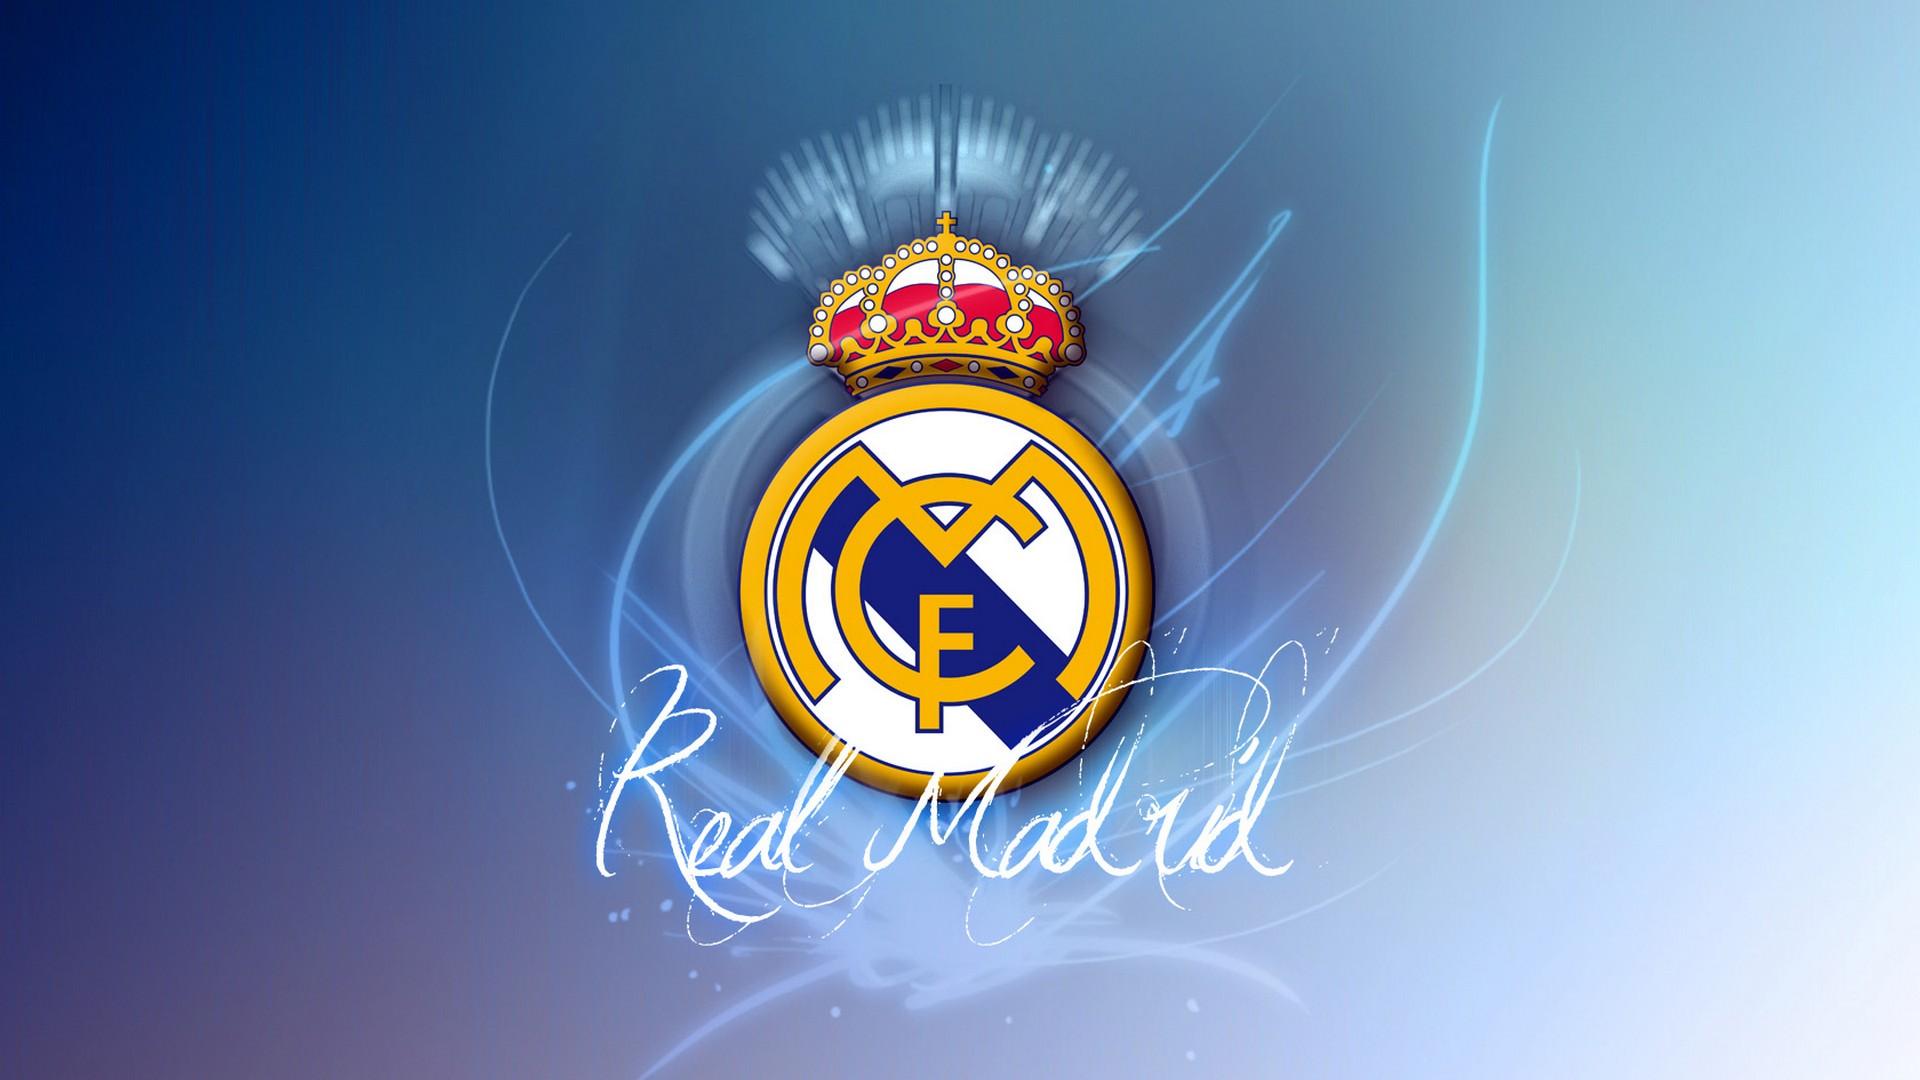 HD Real Madrid Background Football Wallpaper